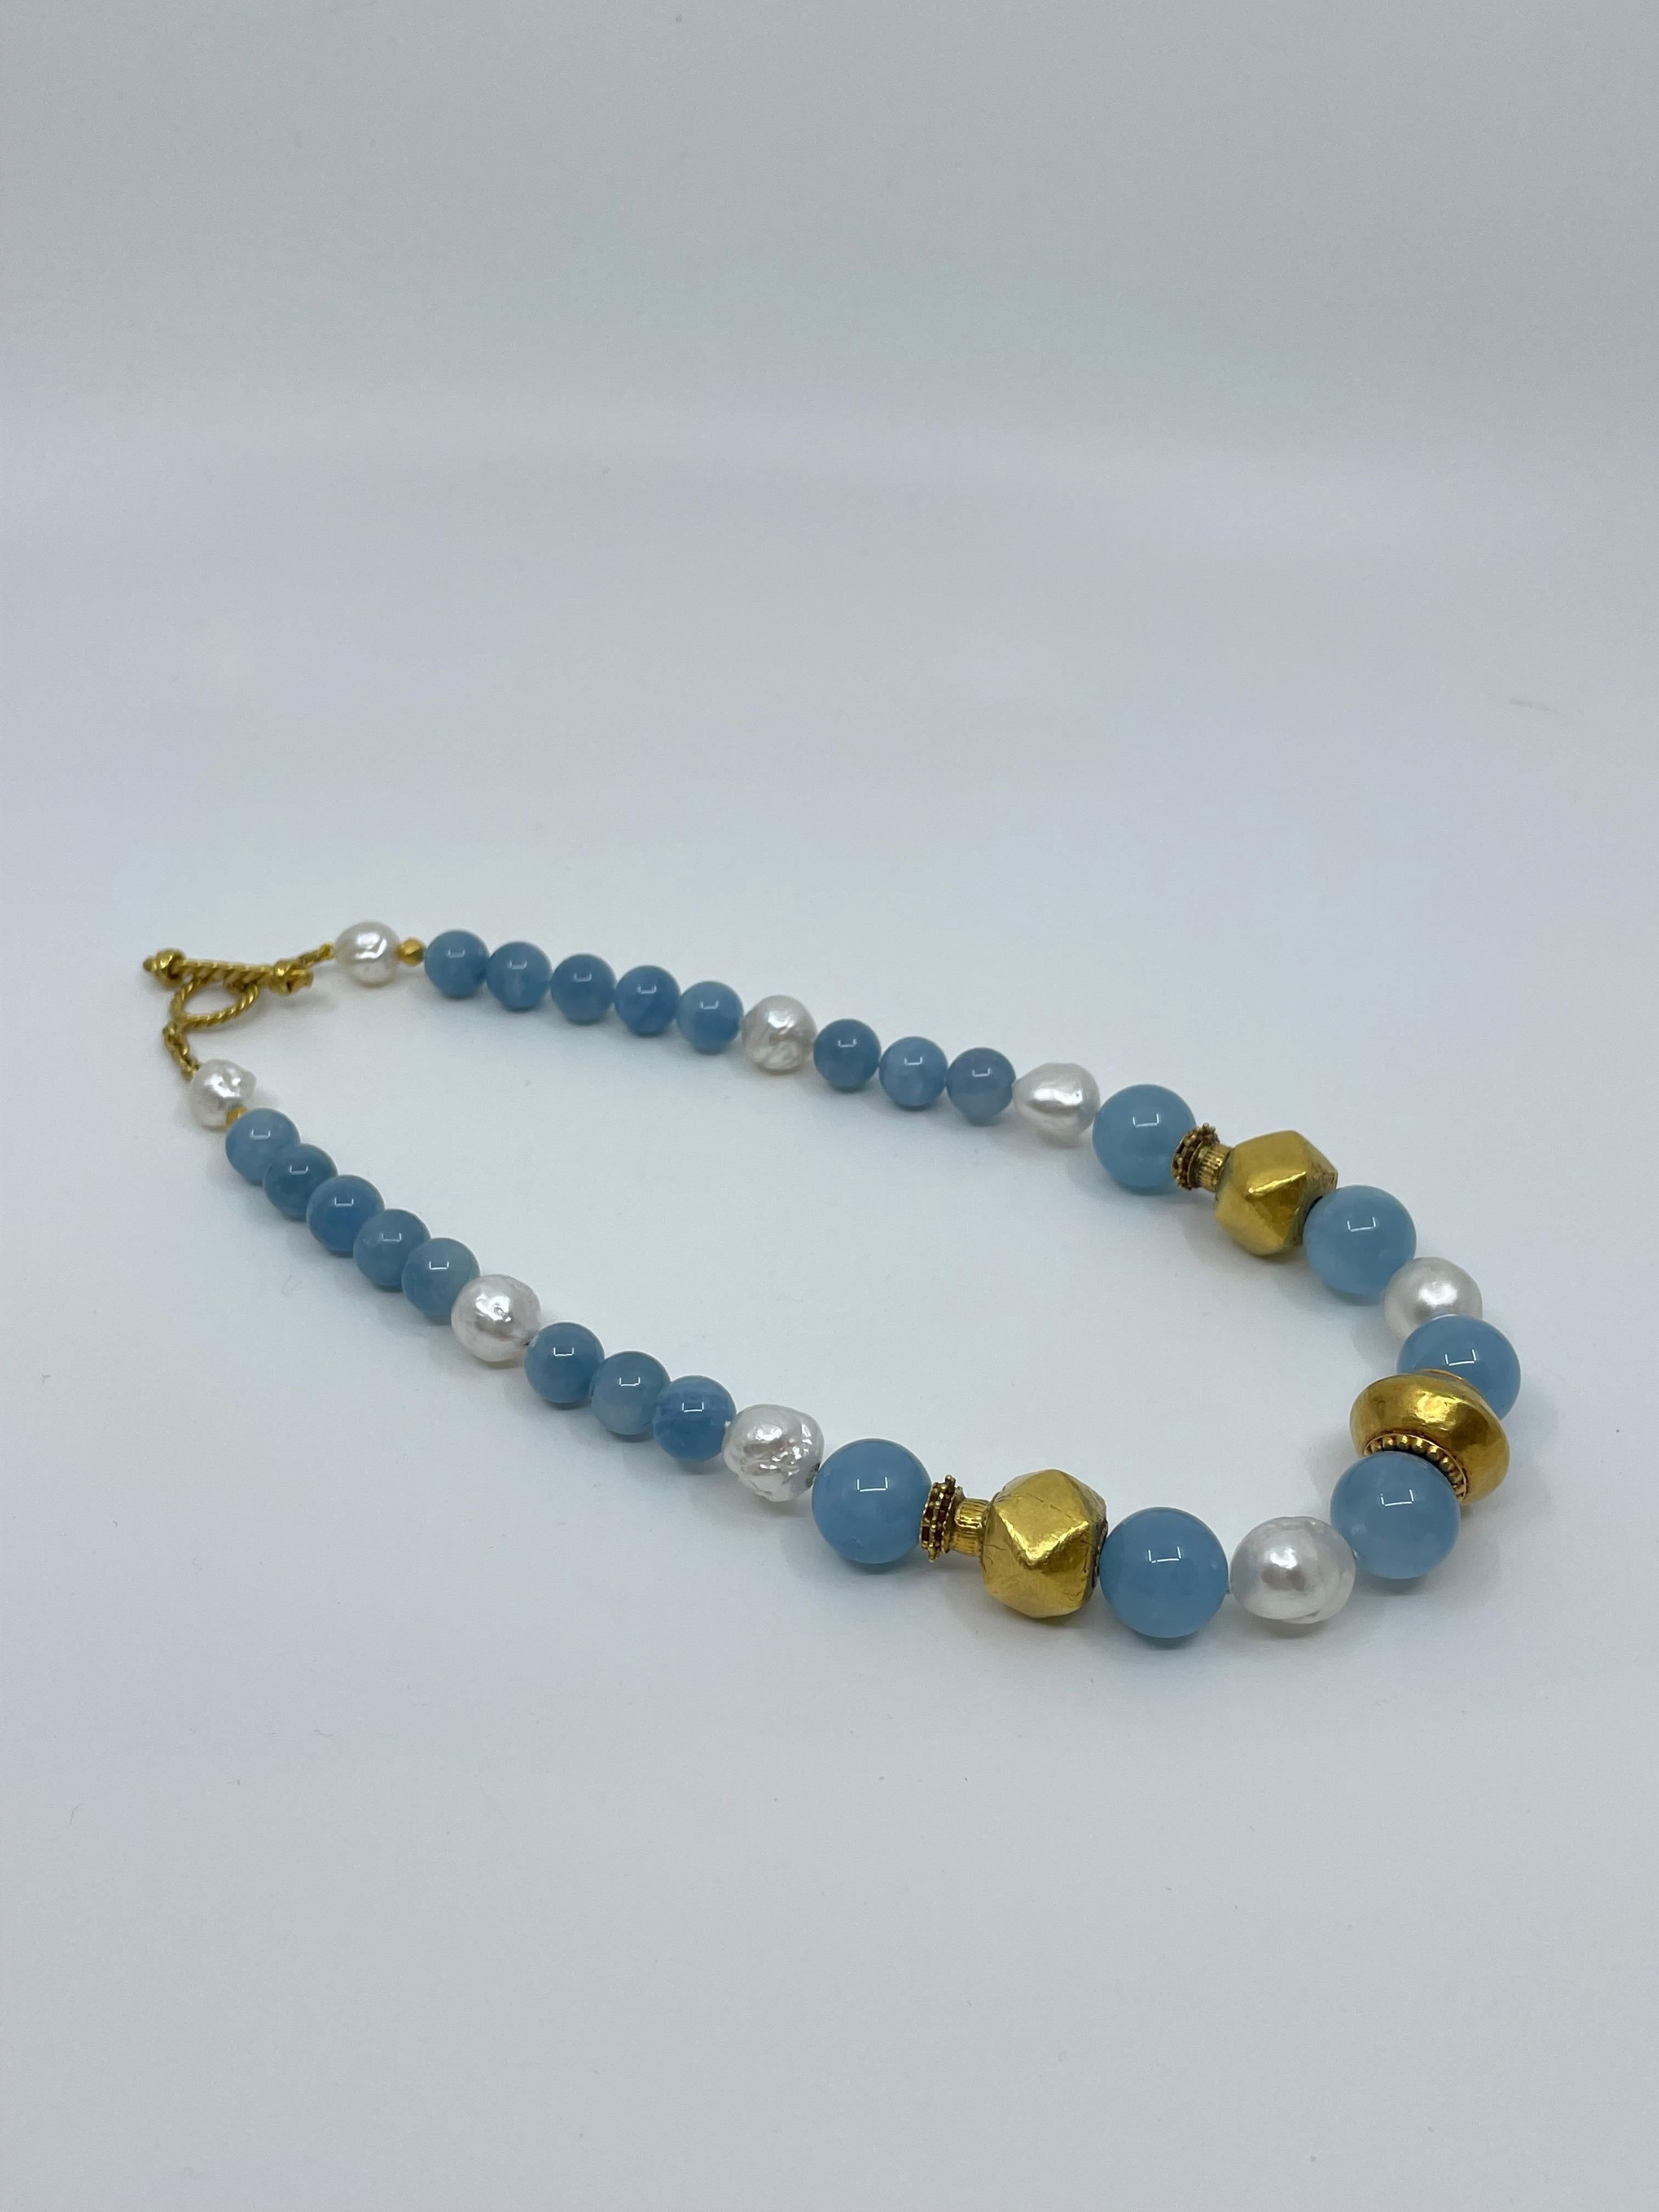 Necklace with Aquamarine, South Sea Pearls, Gold & 18K Solid Gold Beads For Sale 3